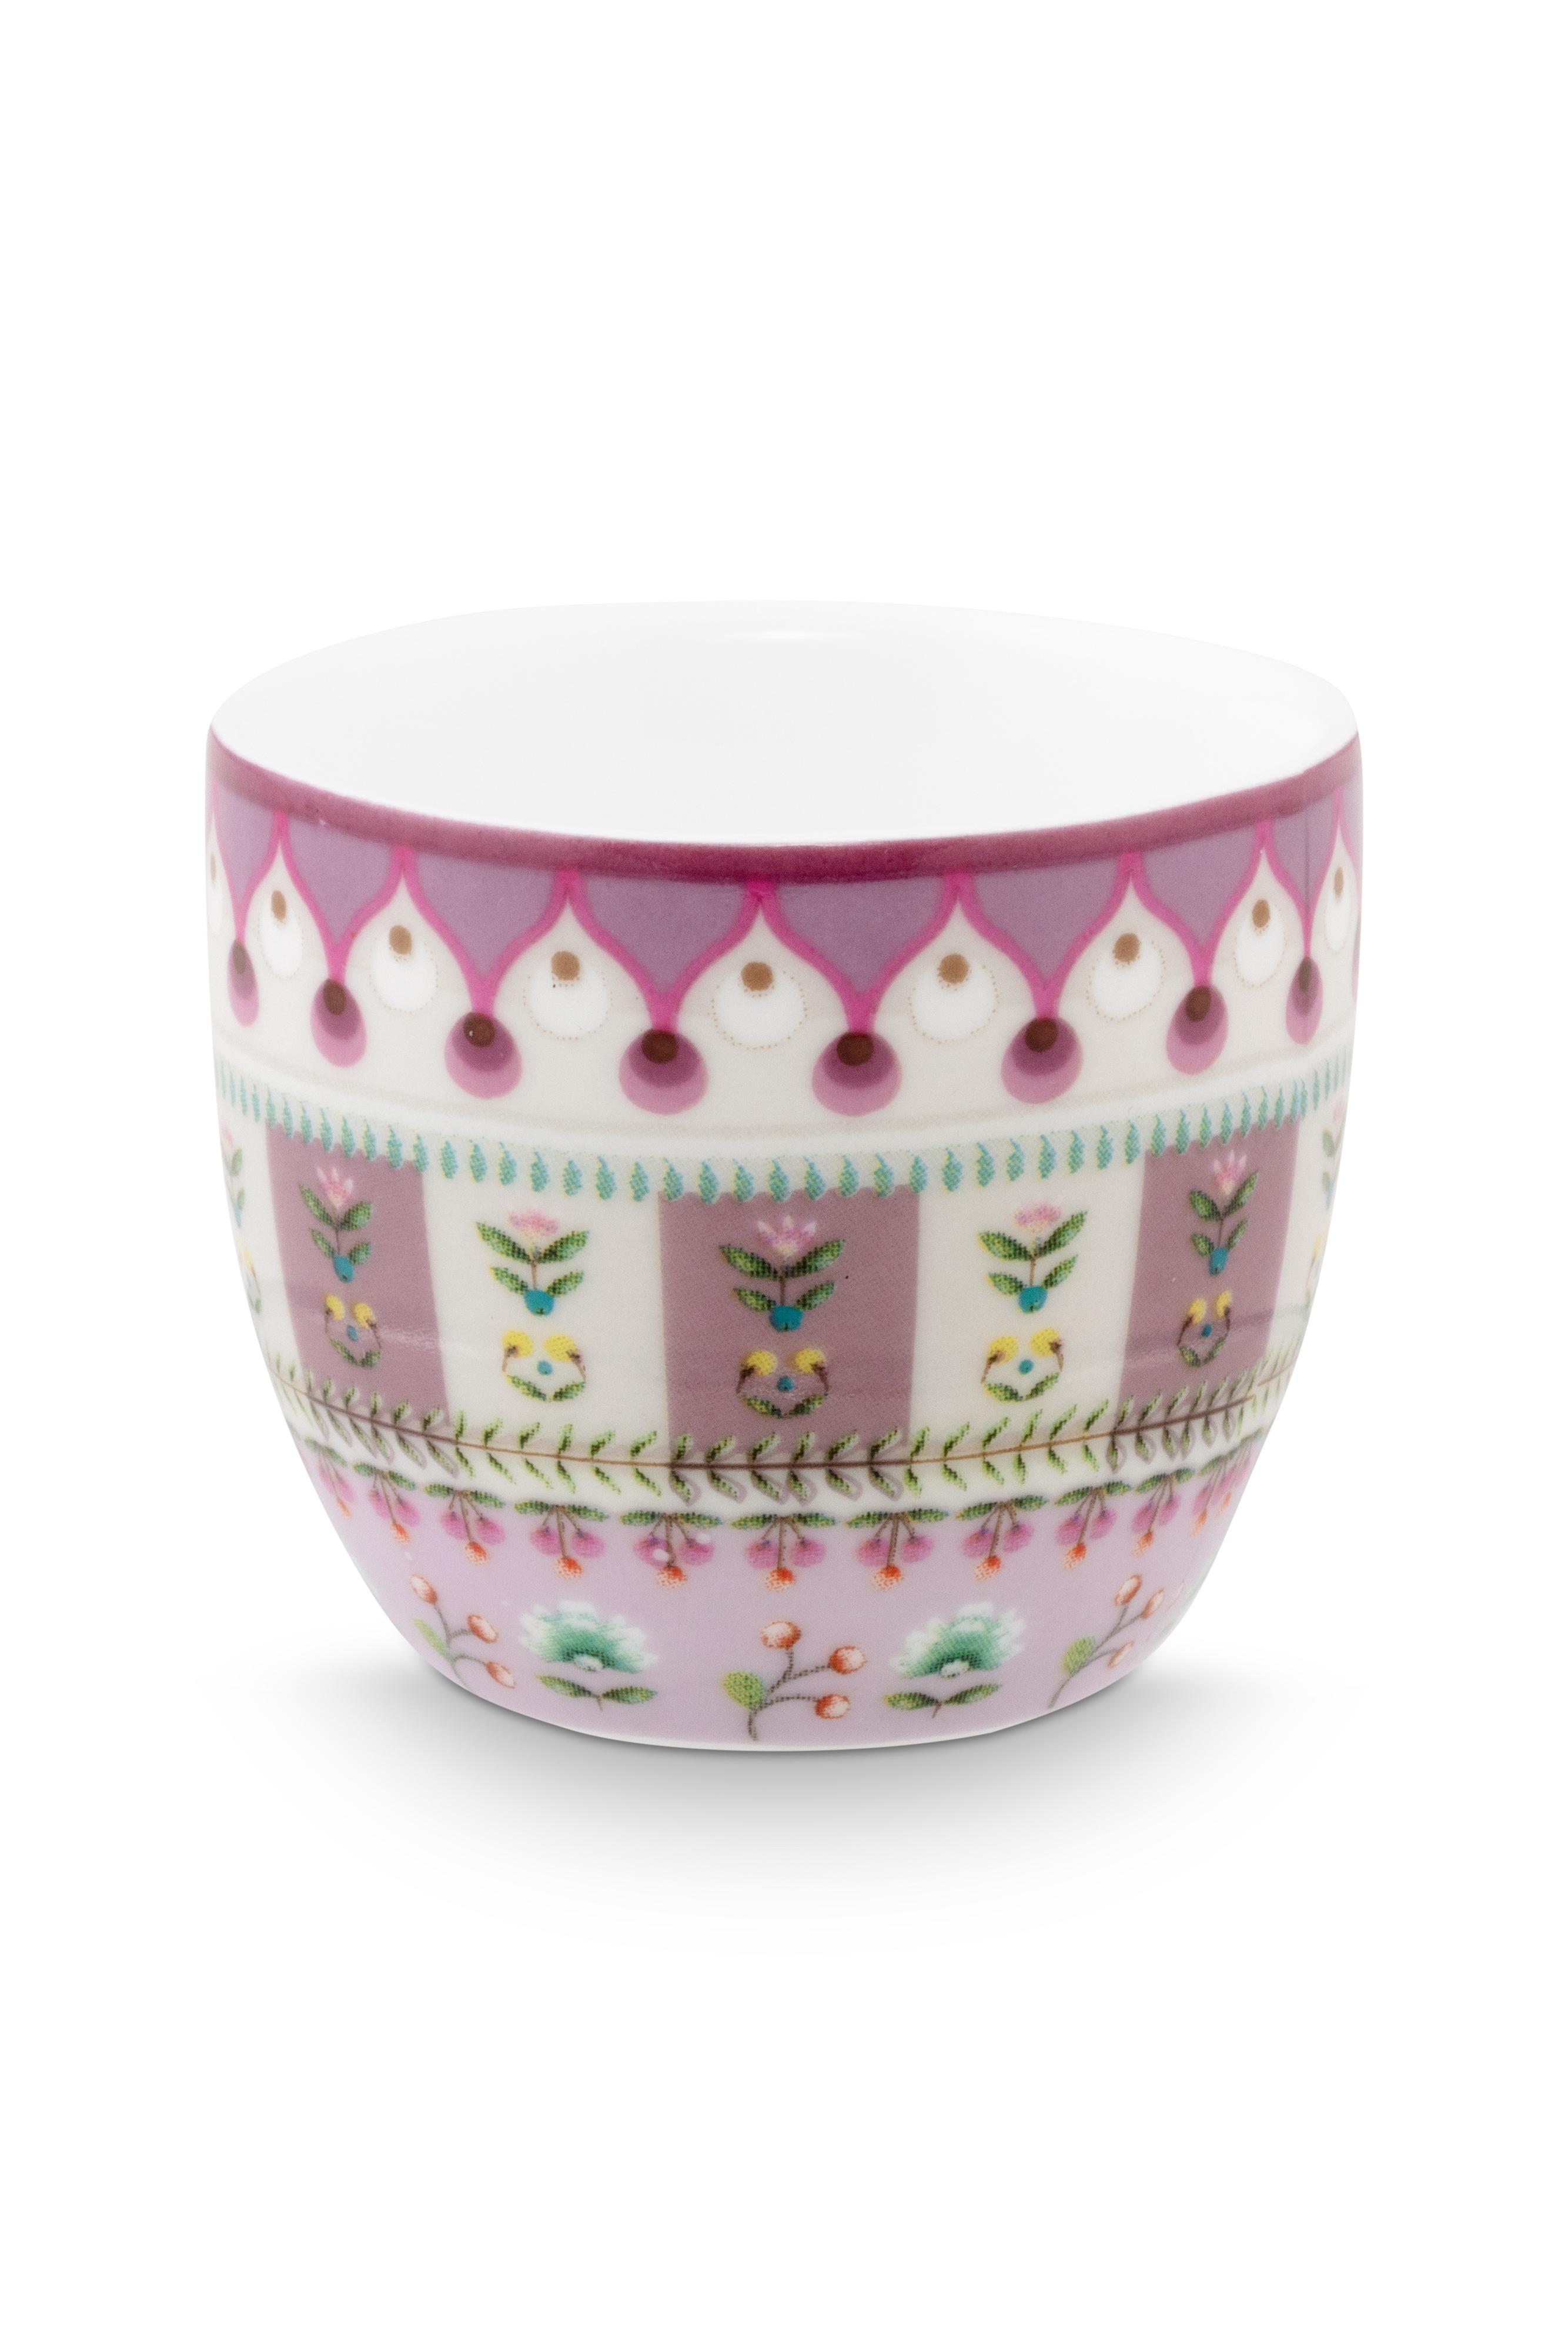 Egg Cup Lily-lotus Moon Delight Multi Ø4.7cm Gift